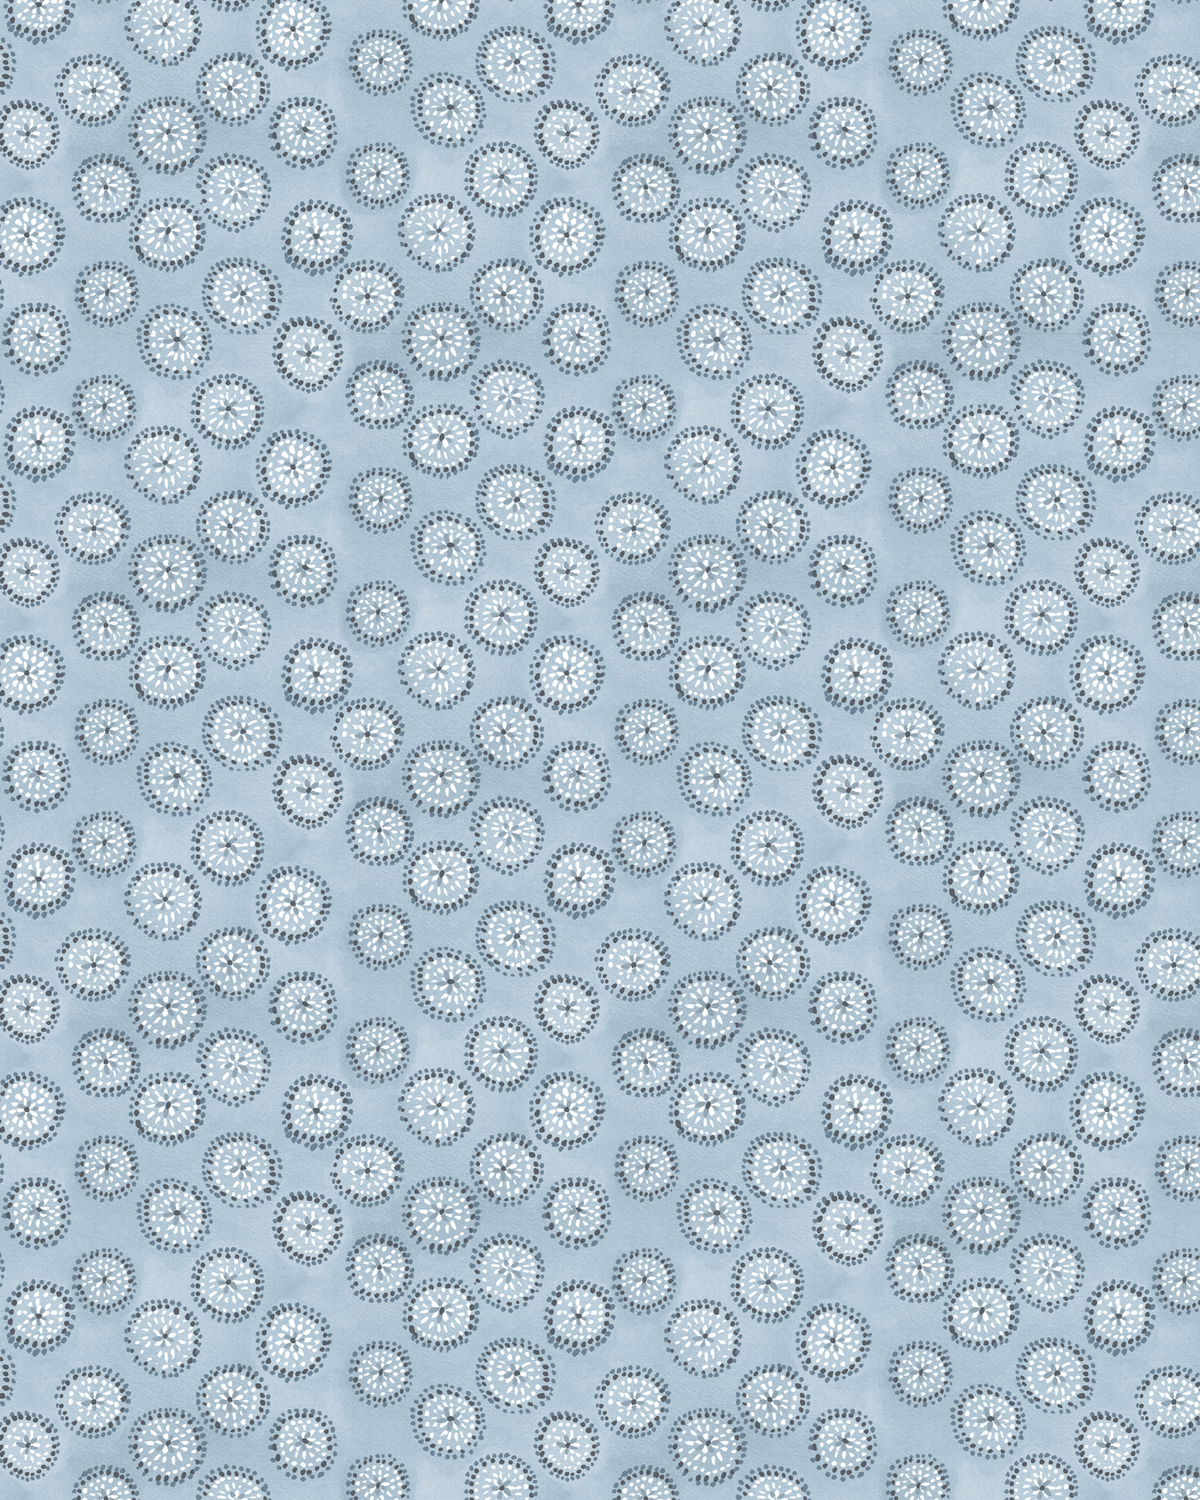 Dotted Floral Fabric in Blue-Gray